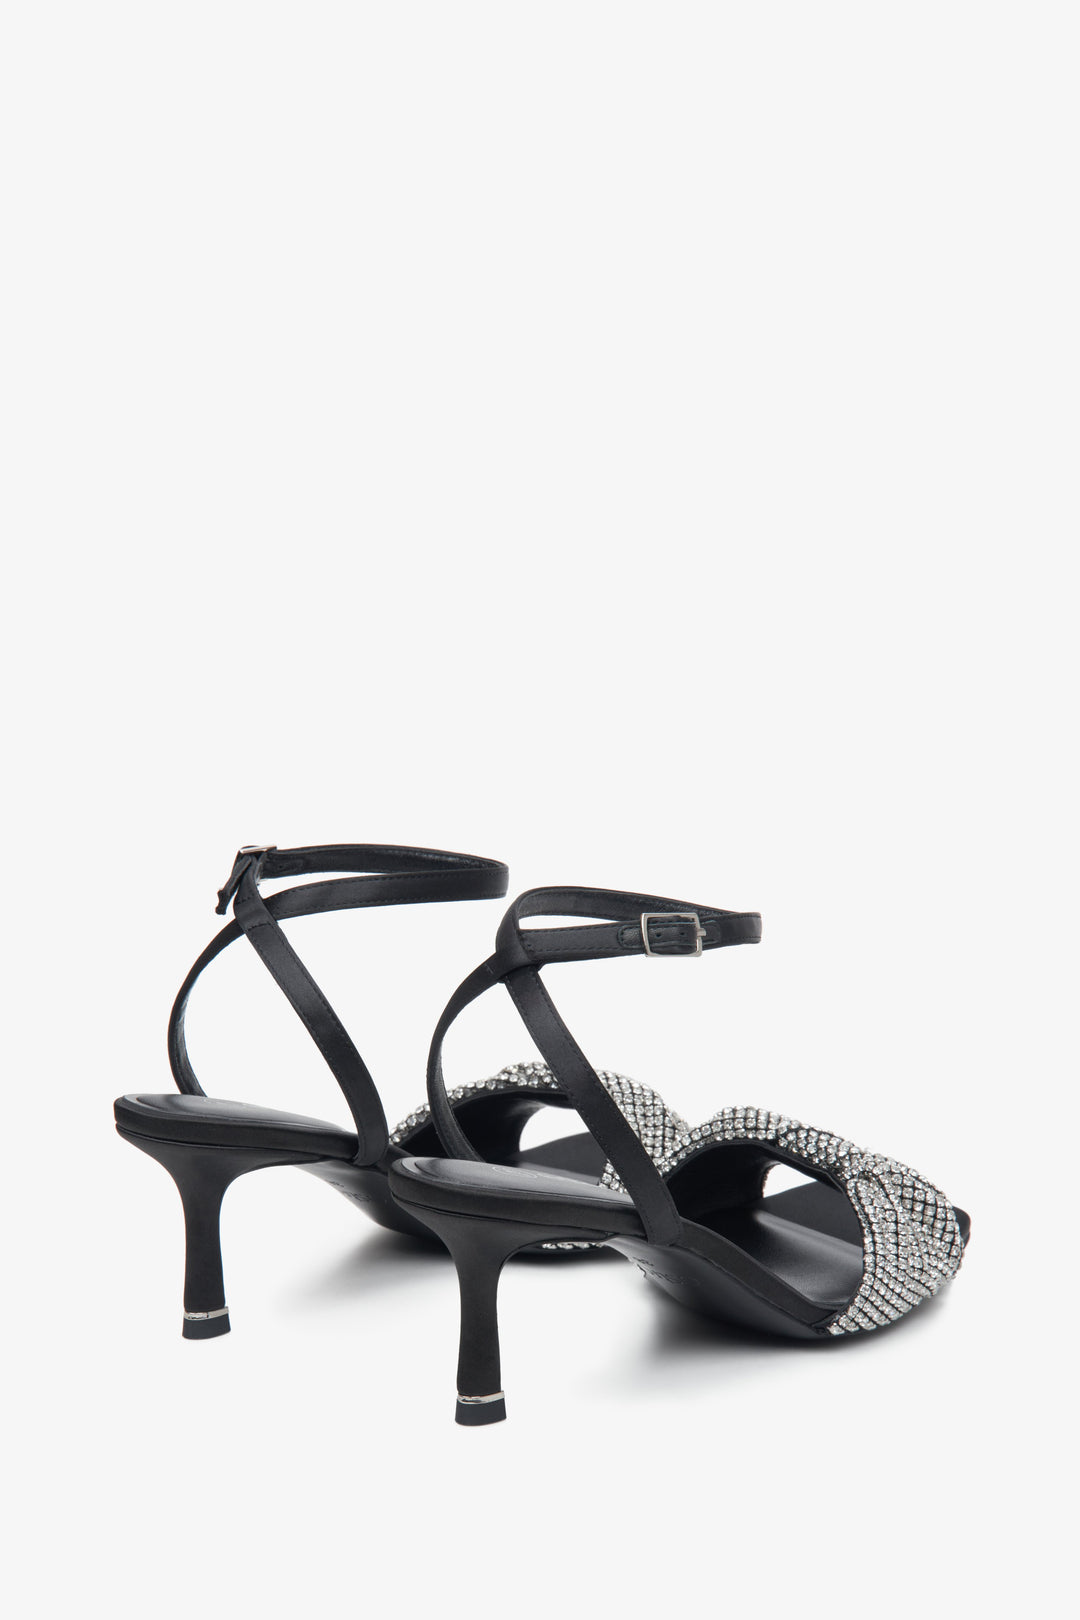 Women's leather sandals - presentation of the footwear from above.